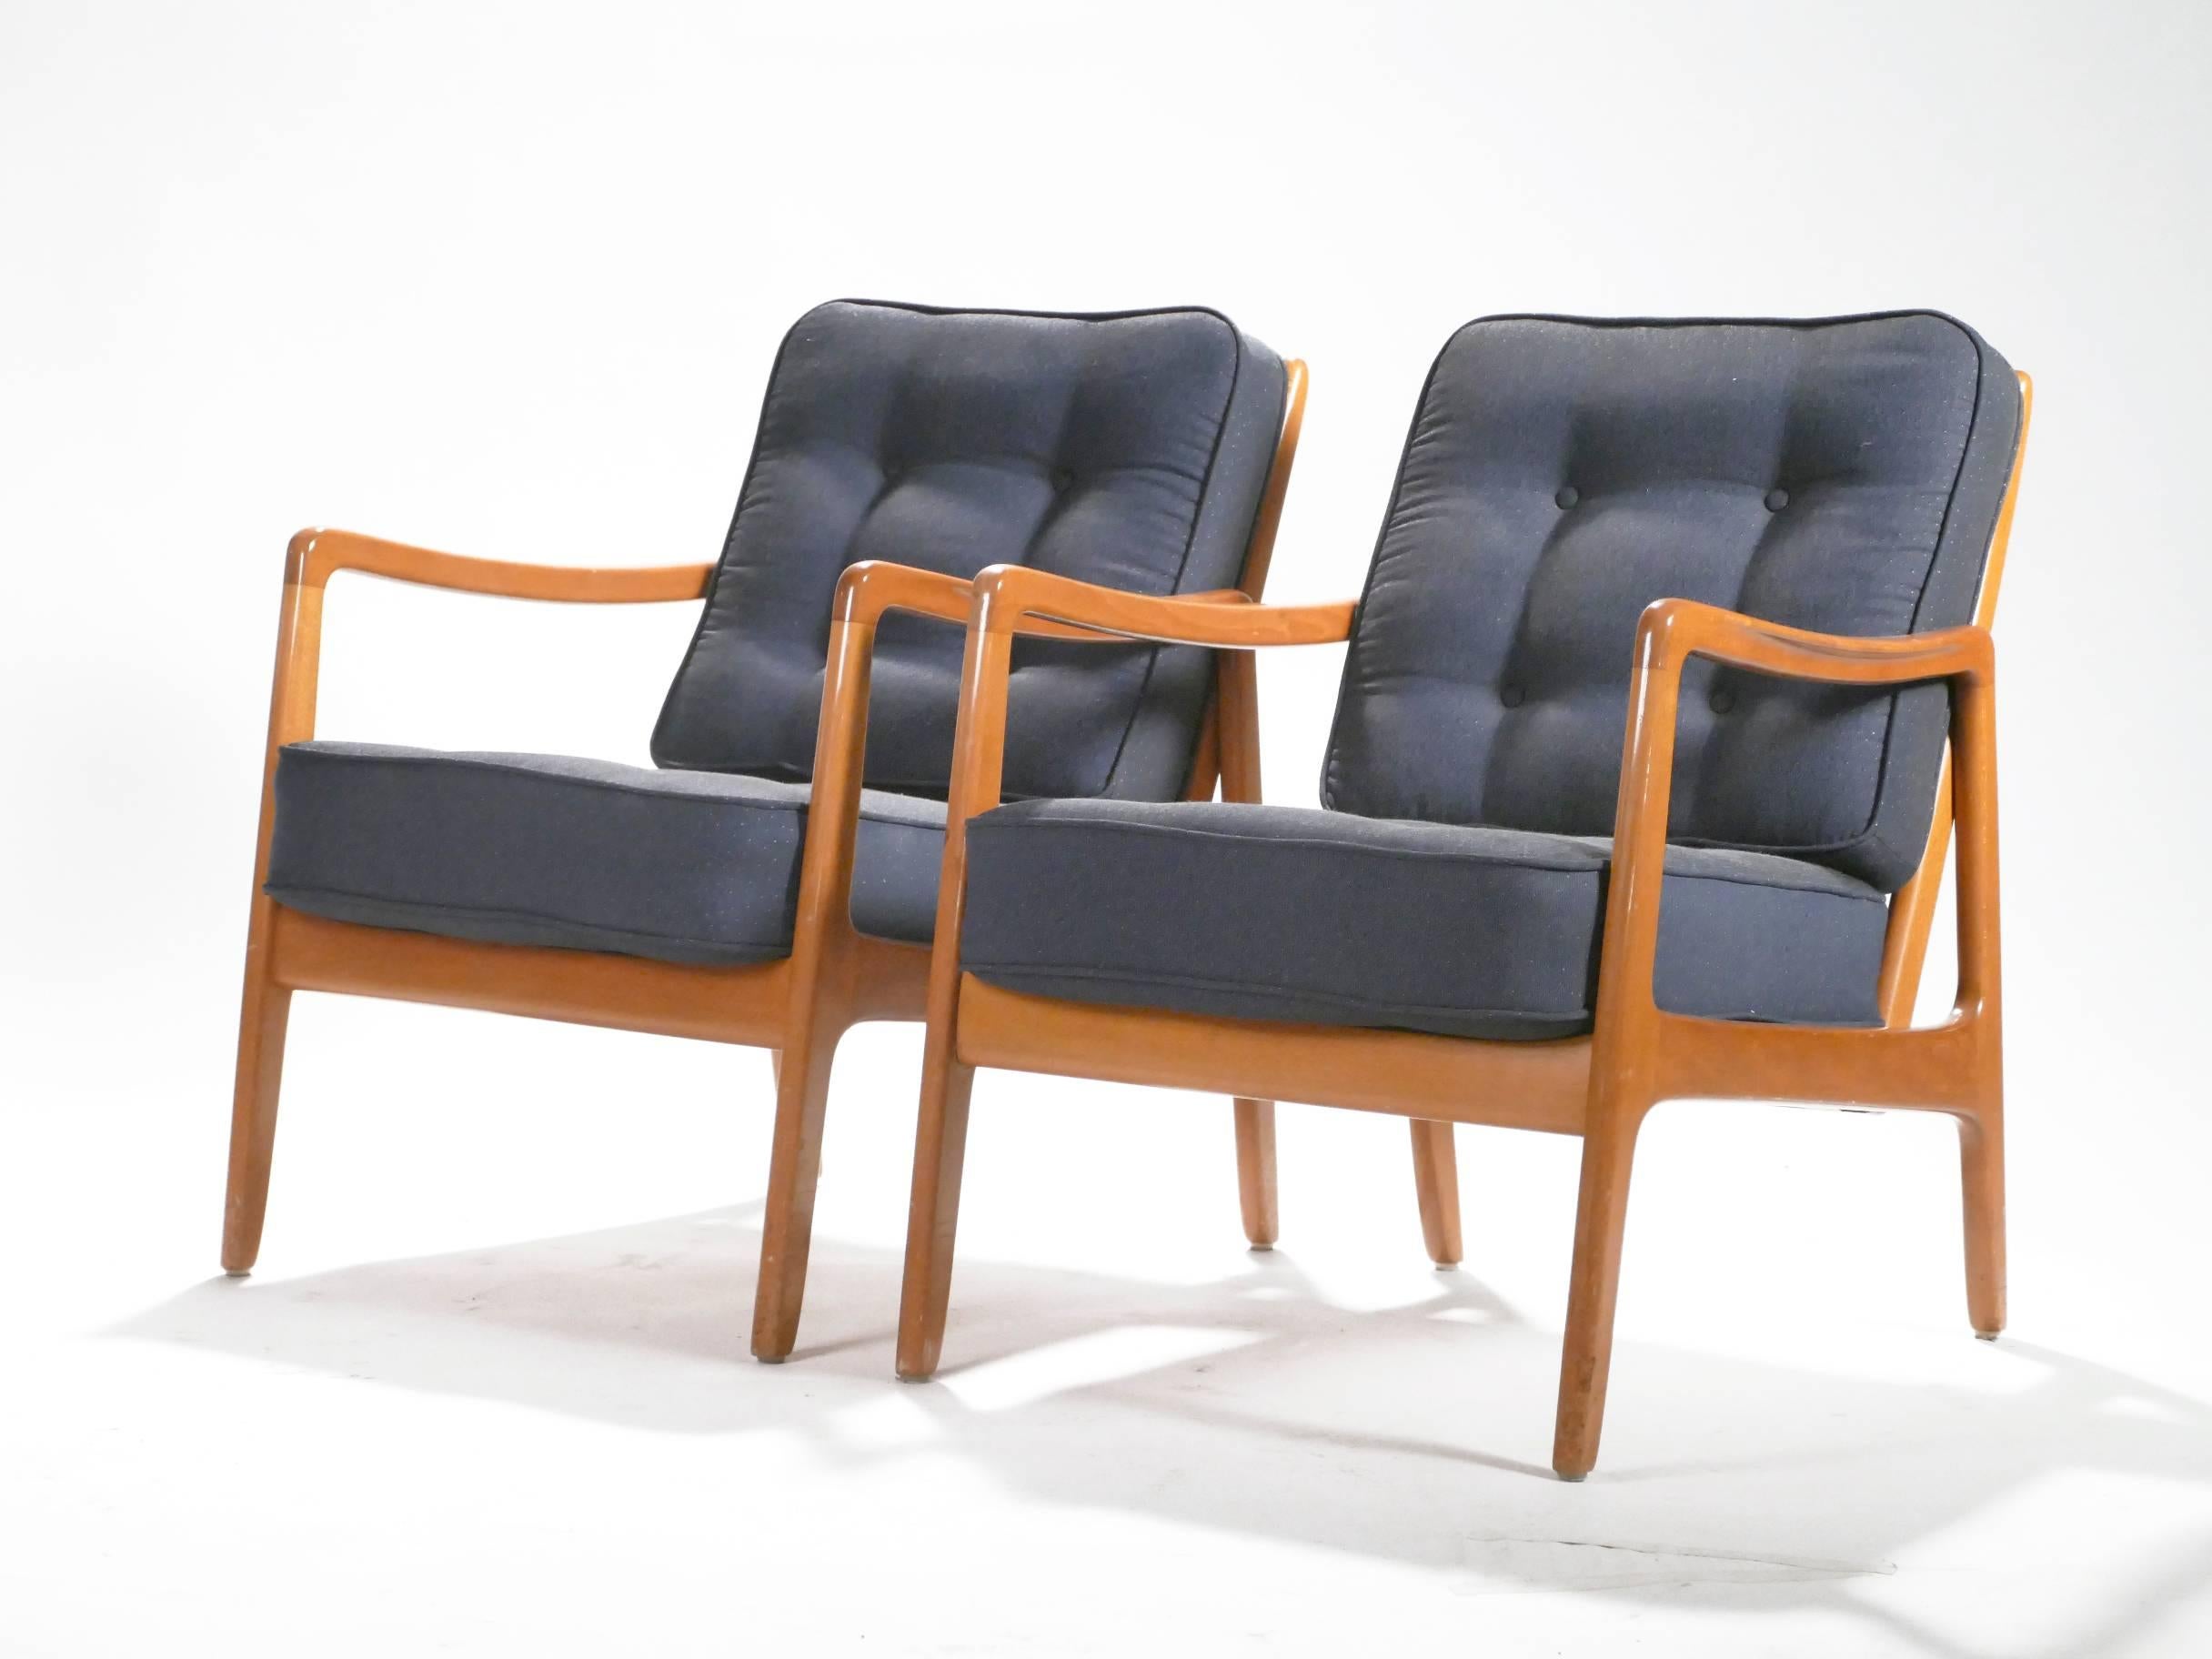 Renowned Danish designer Ole Wanscher is credited for being influential during the height of the acclaimed Scandinavian design movement that took place during the mid-century. His FD109 armchairs, designed during the 1960’s for respected Danish